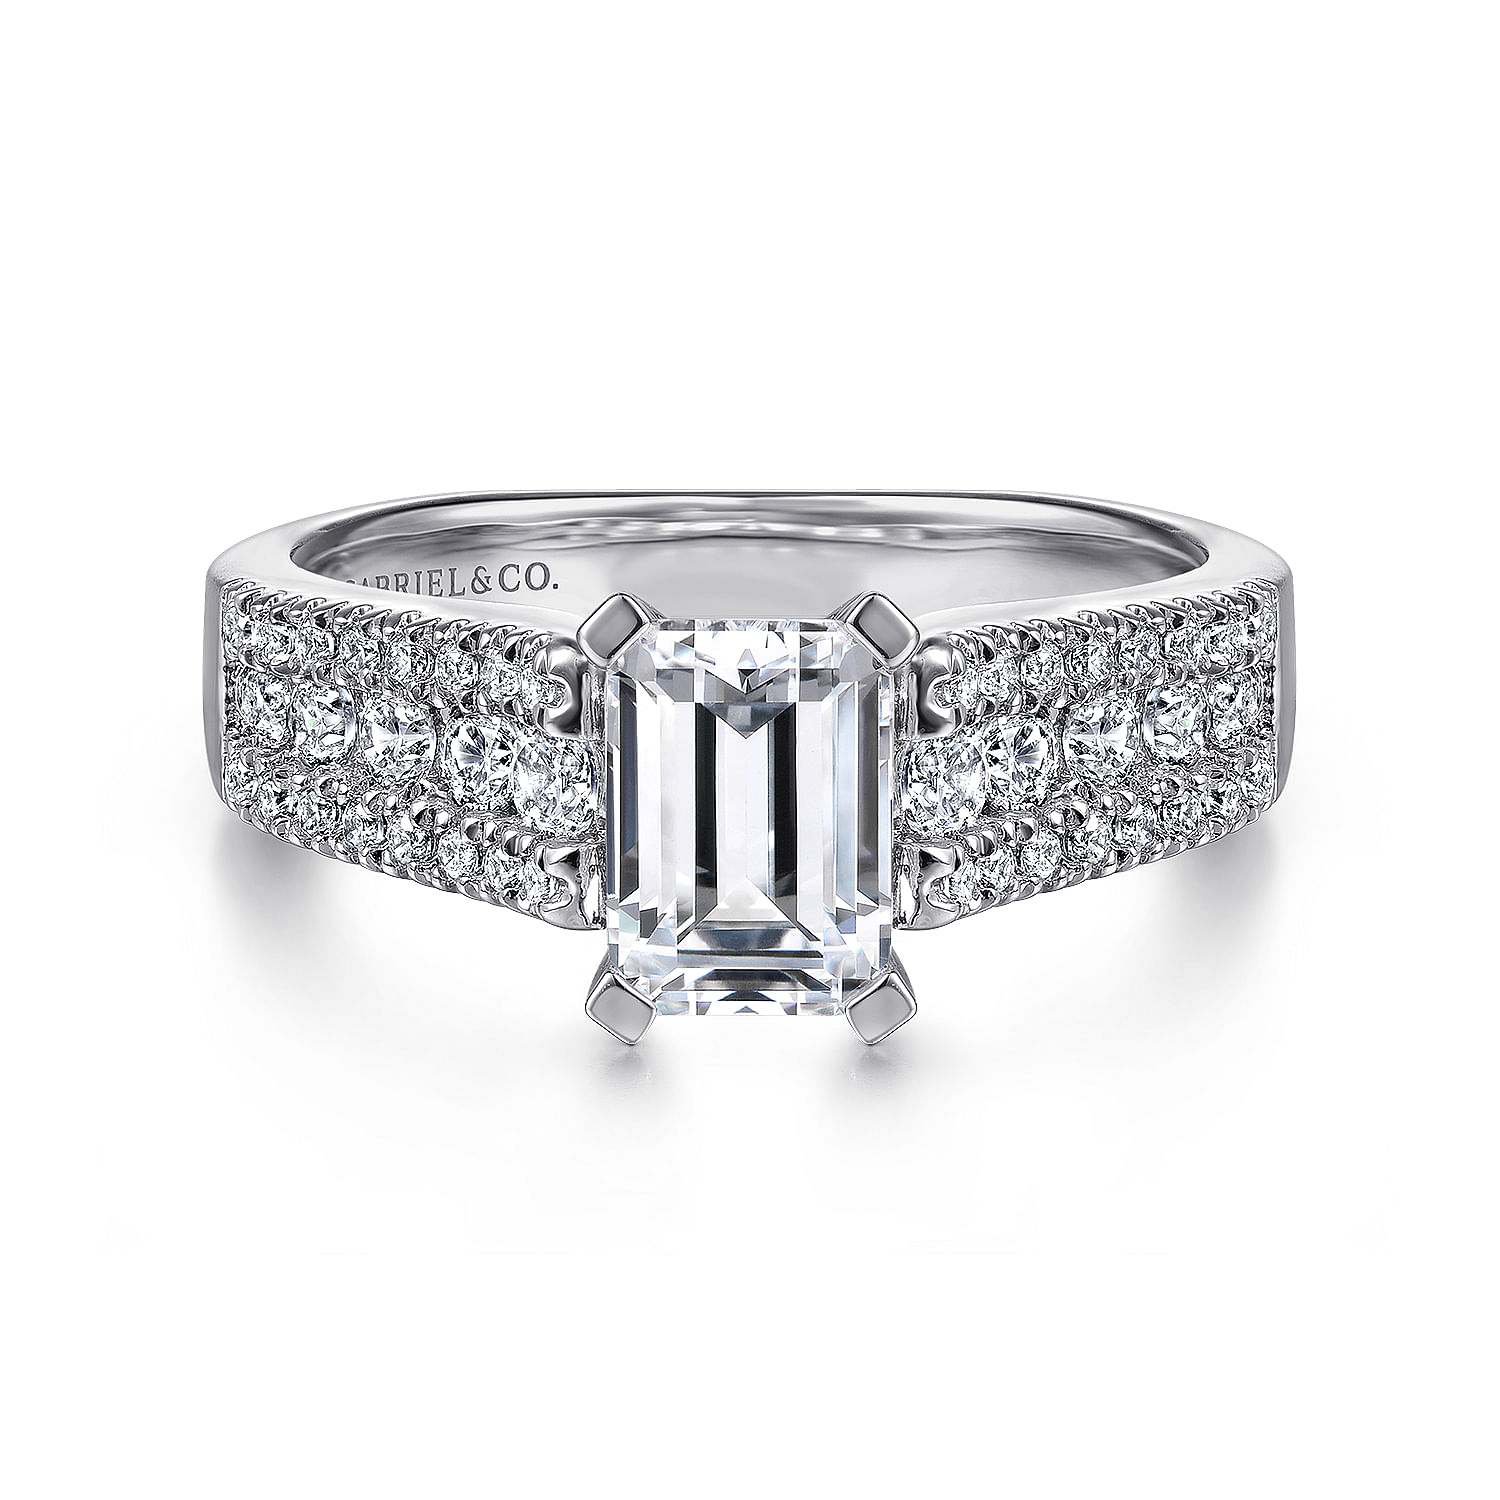 Channing - 14K White Gold Wide Band Emerald Cut Diamond Engagement Ring